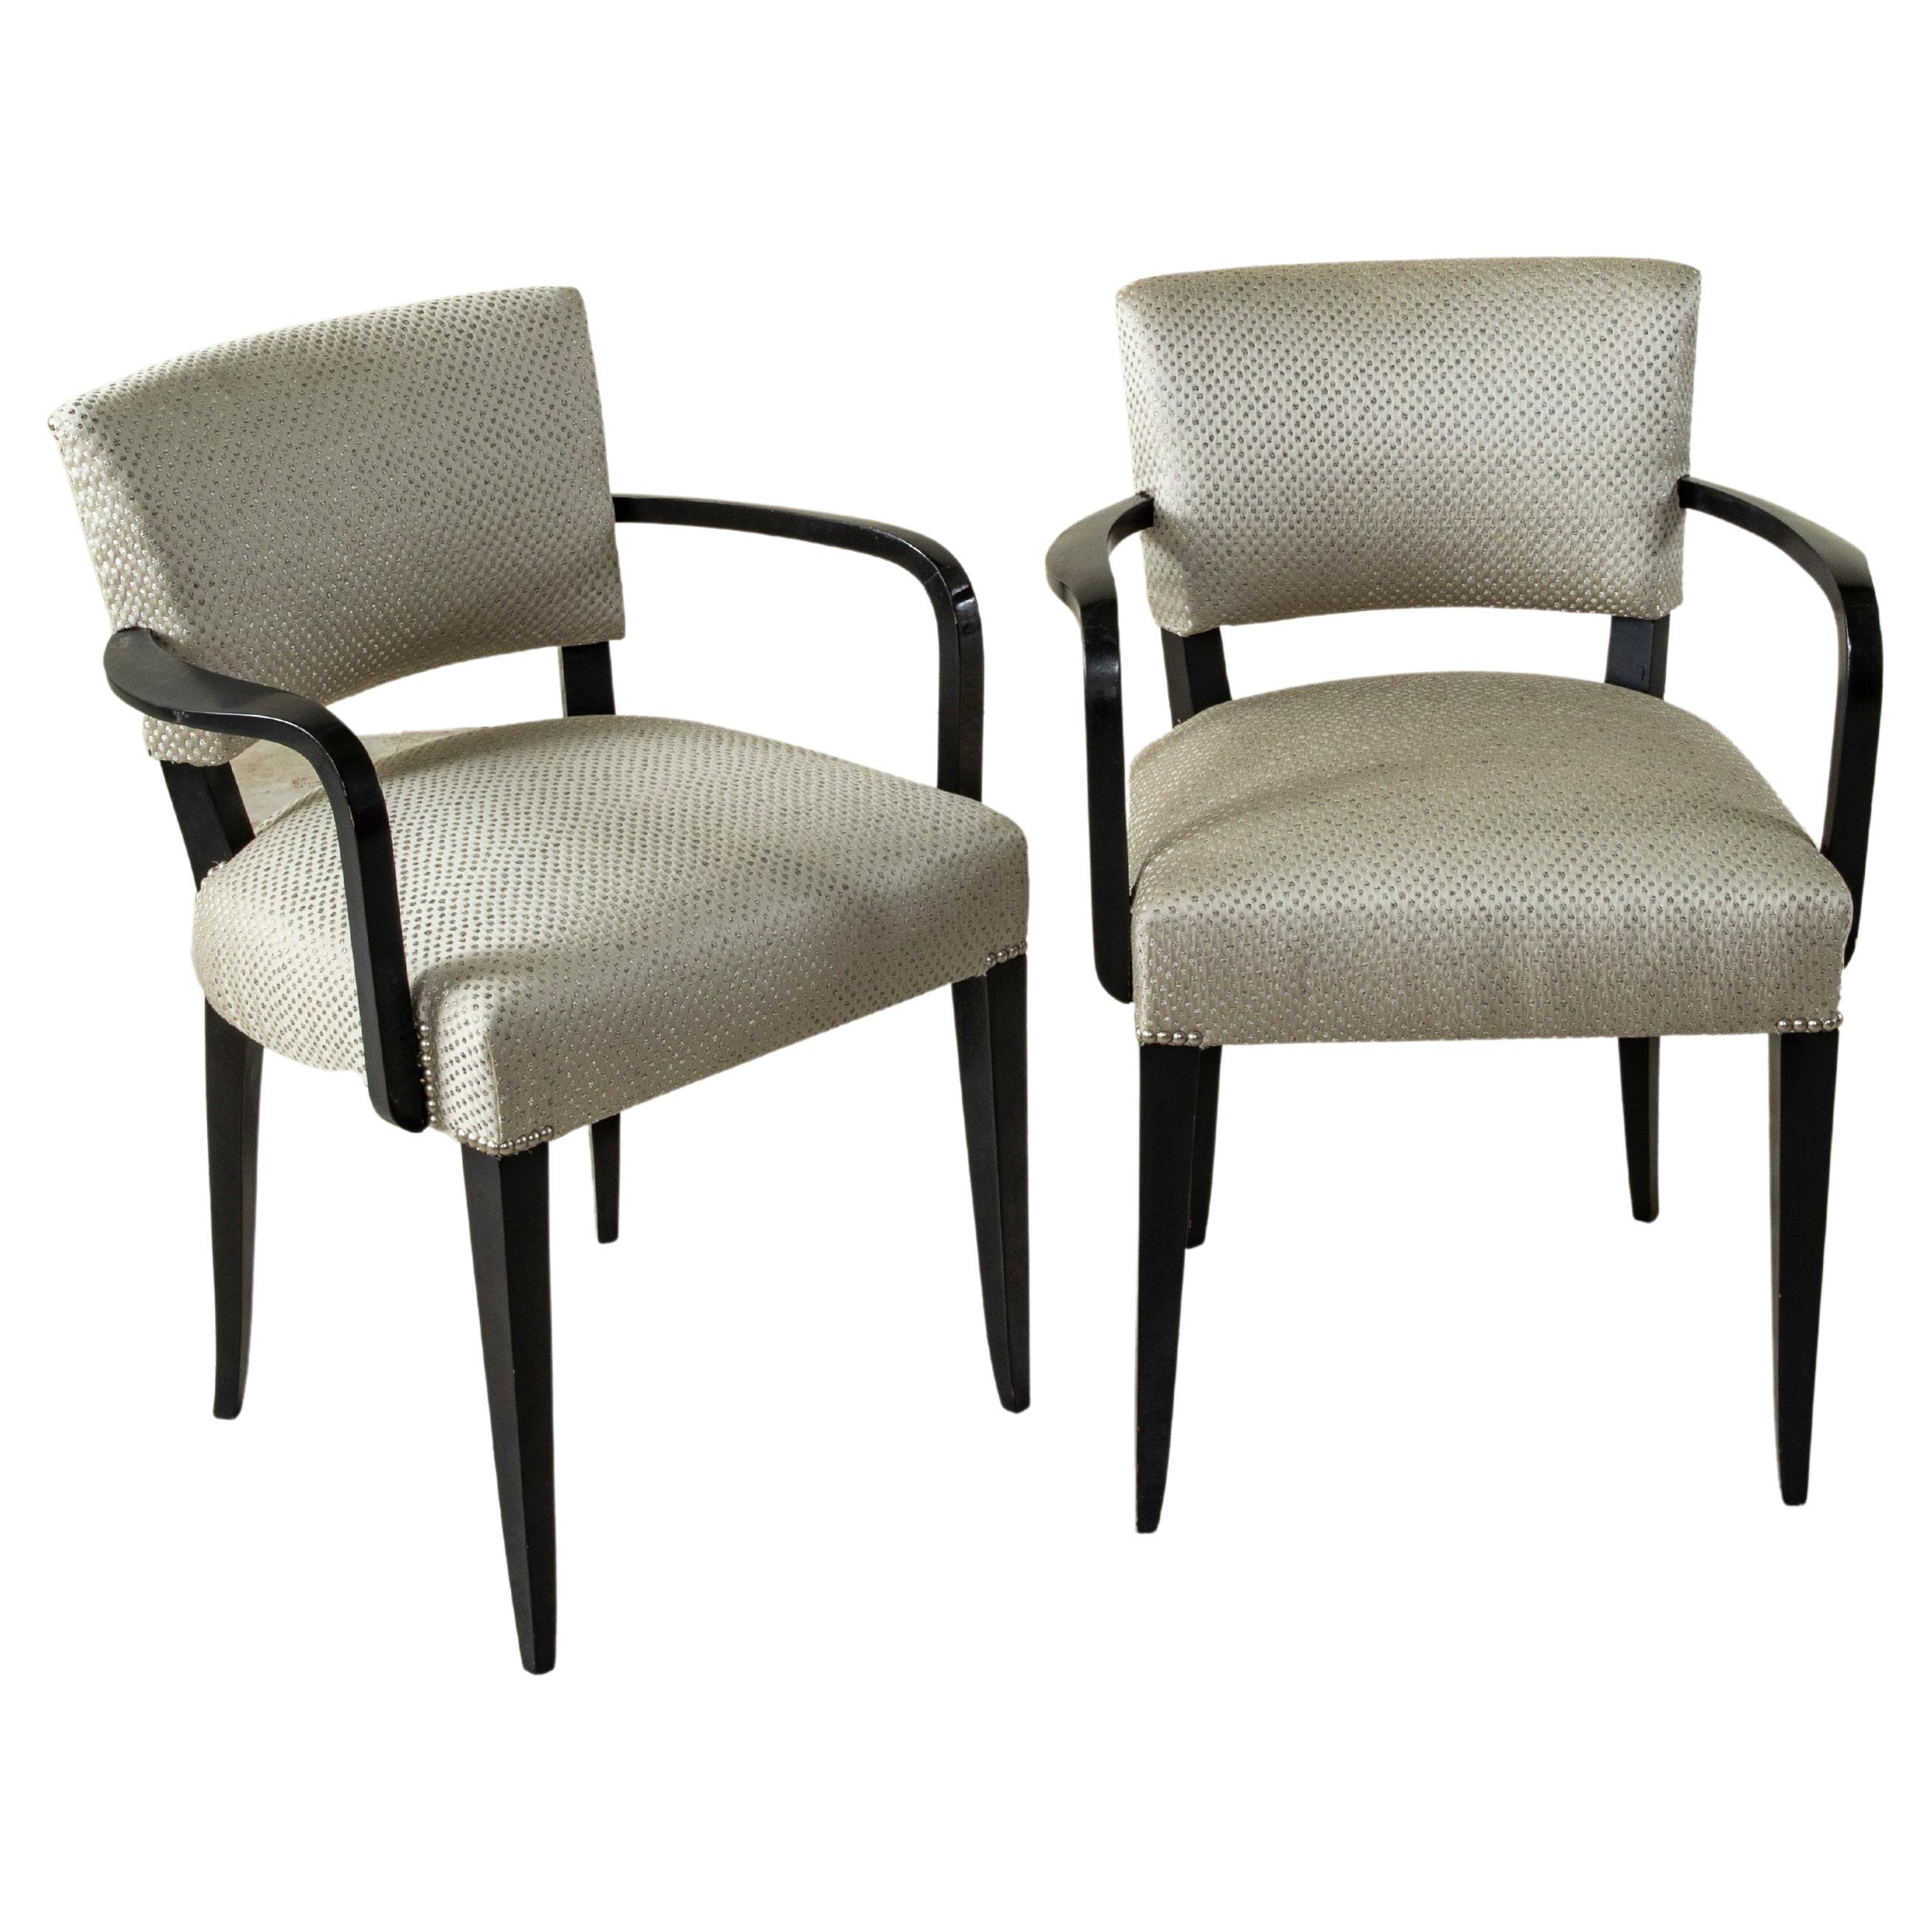 Mid-20th Century French Black Lacquer Bridge Chairs with Nail Head Trim